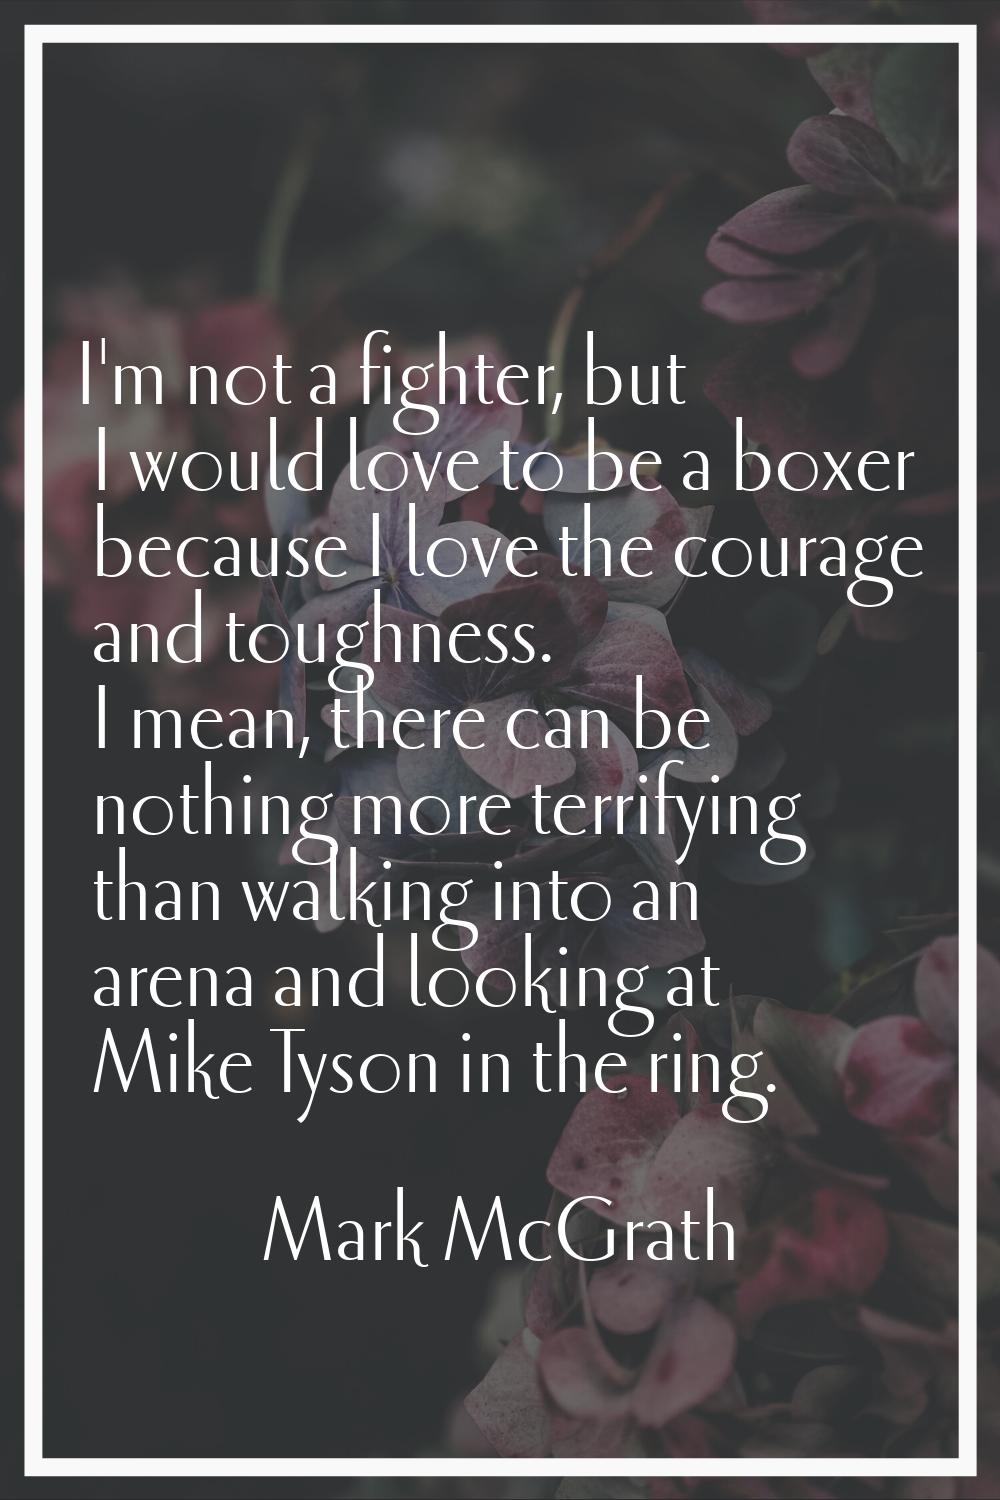 I'm not a fighter, but I would love to be a boxer because I love the courage and toughness. I mean,